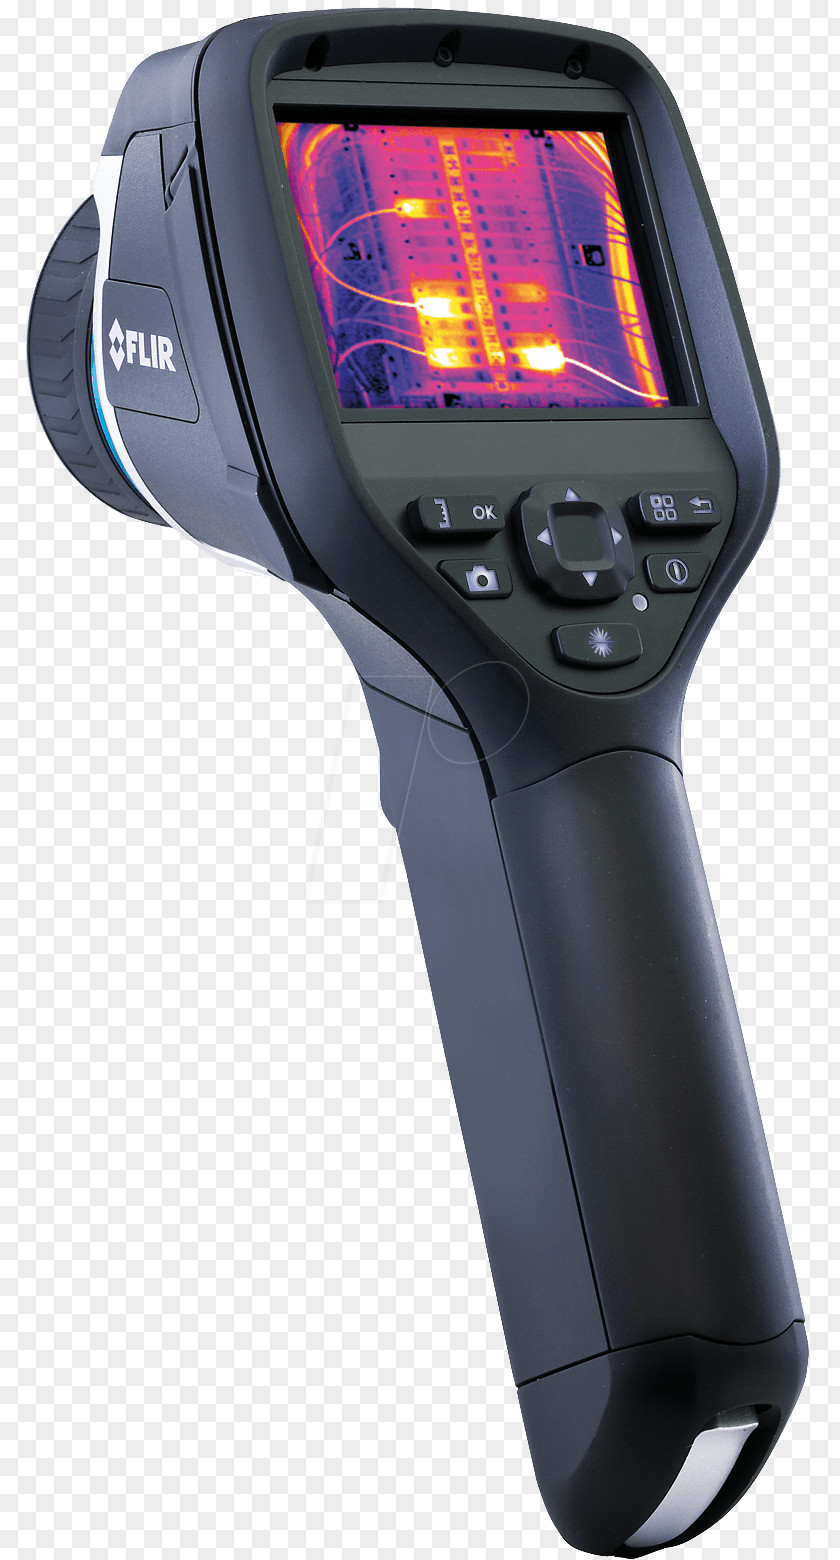 Camera Thermographic Thermography Forward-looking Infrared FLIR Systems Thermal Imaging PNG